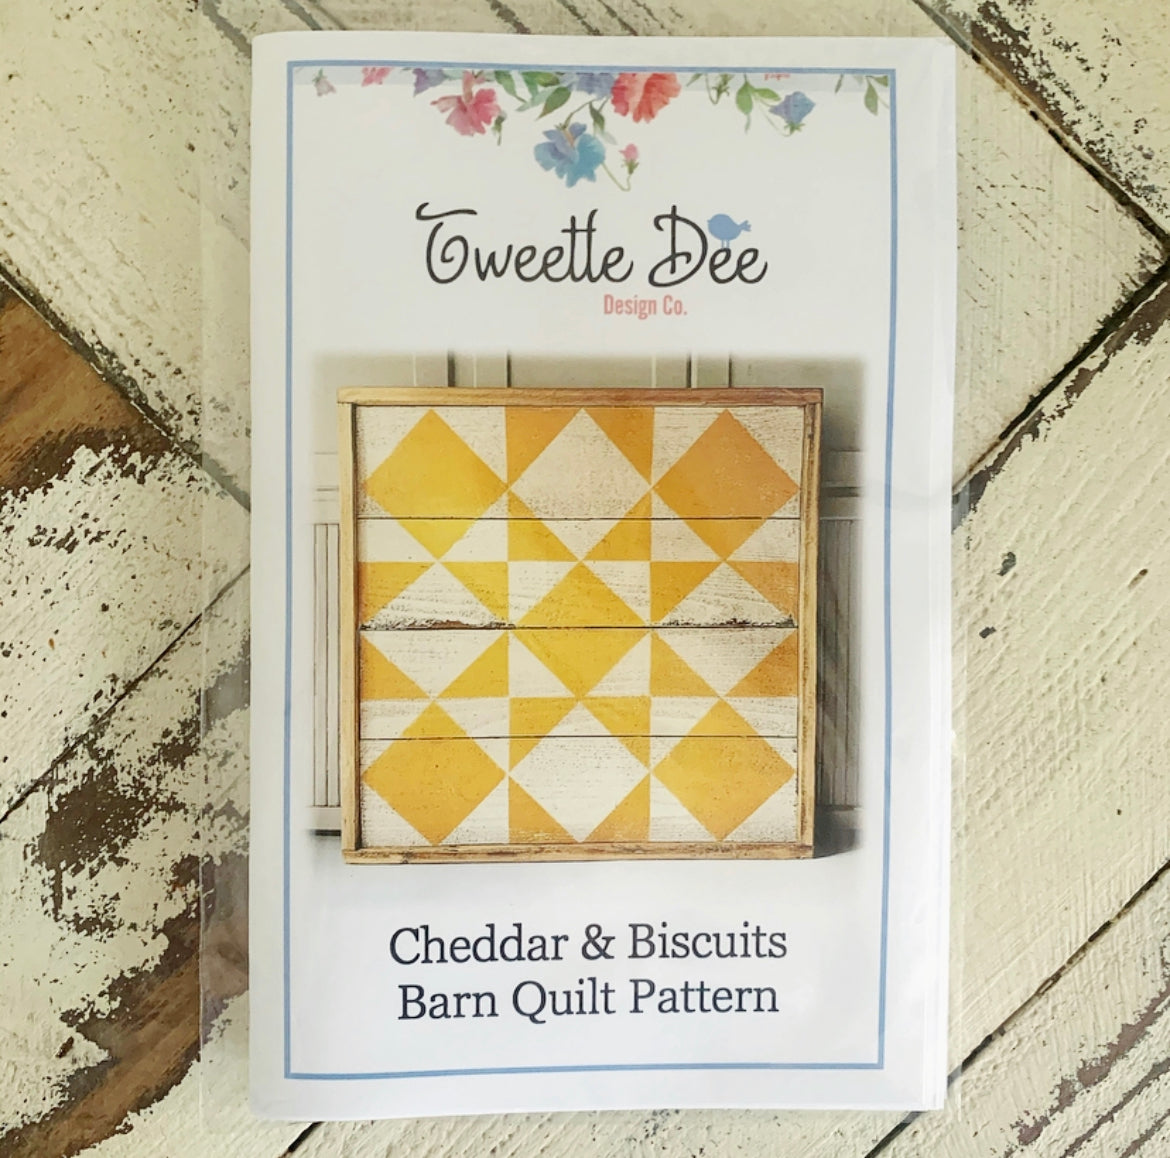 Cheddar and Biscuits Barn Quilt Pattern